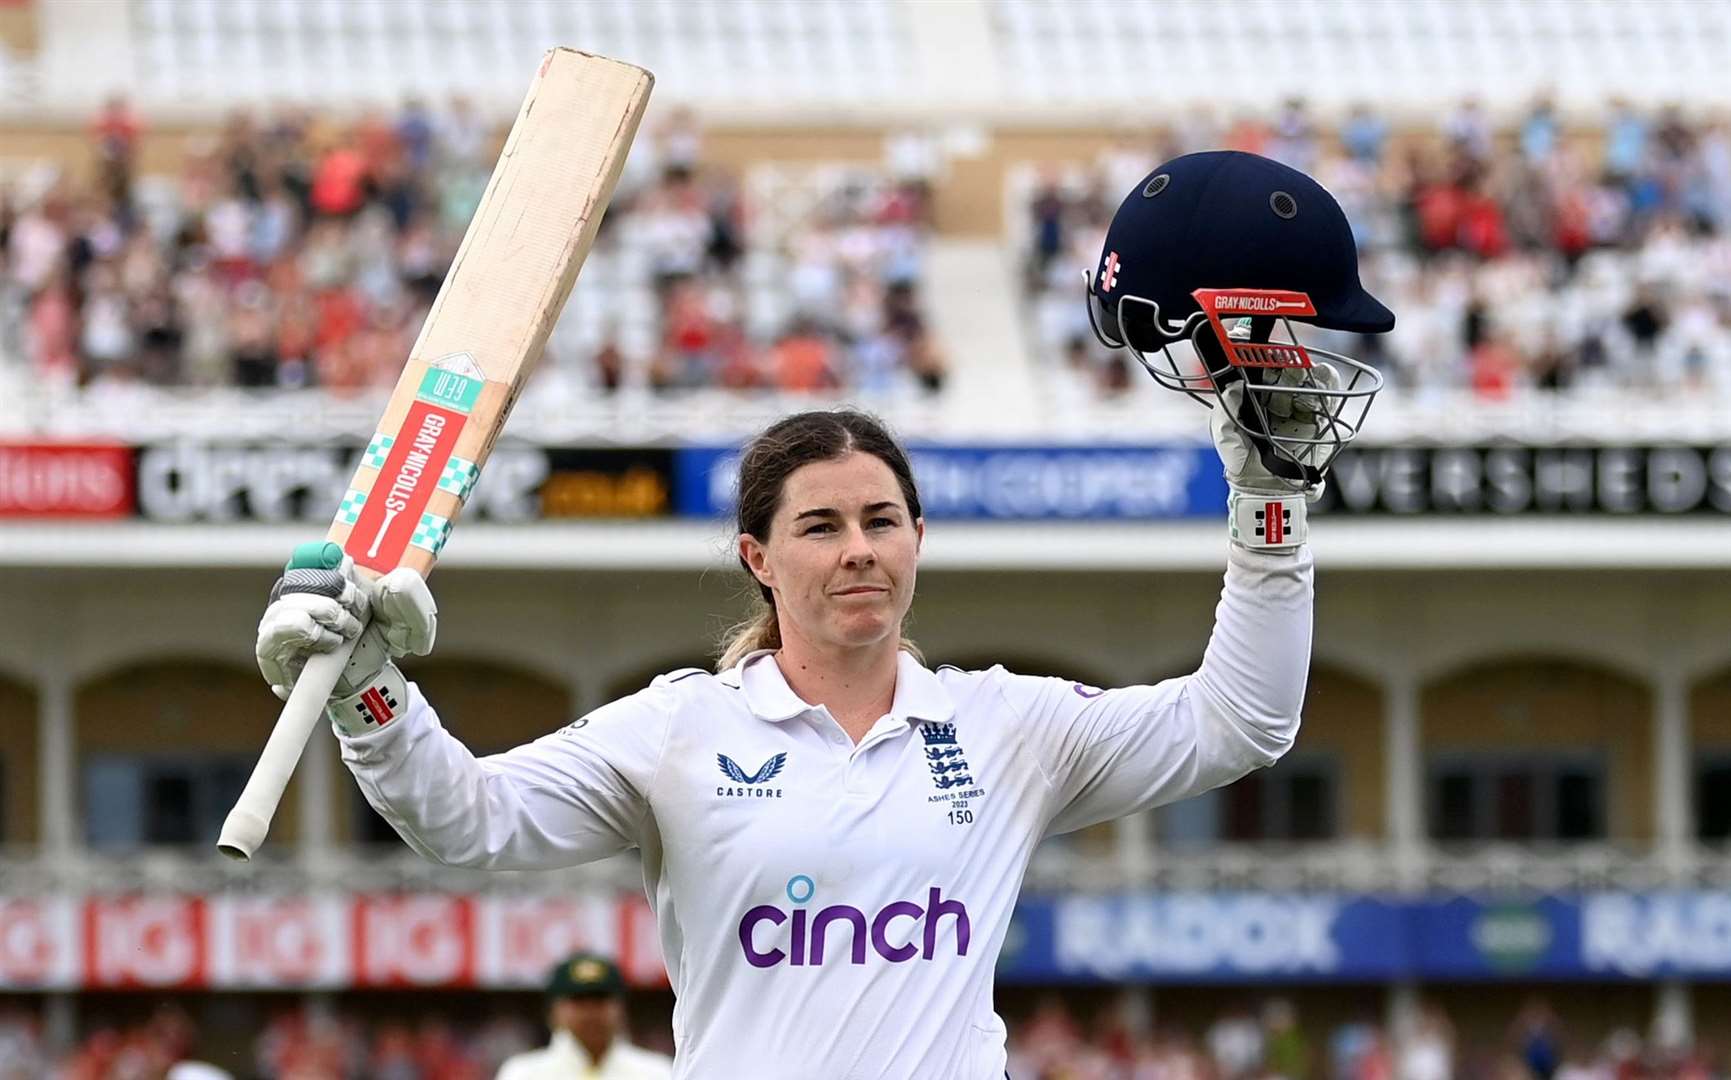 Dover-born England Women's international Tammy Beaumont takes in the applause at Trent Bridge after her record-breaking first-innings knock of 208 against Australia. Picture: ECB / Getty Images